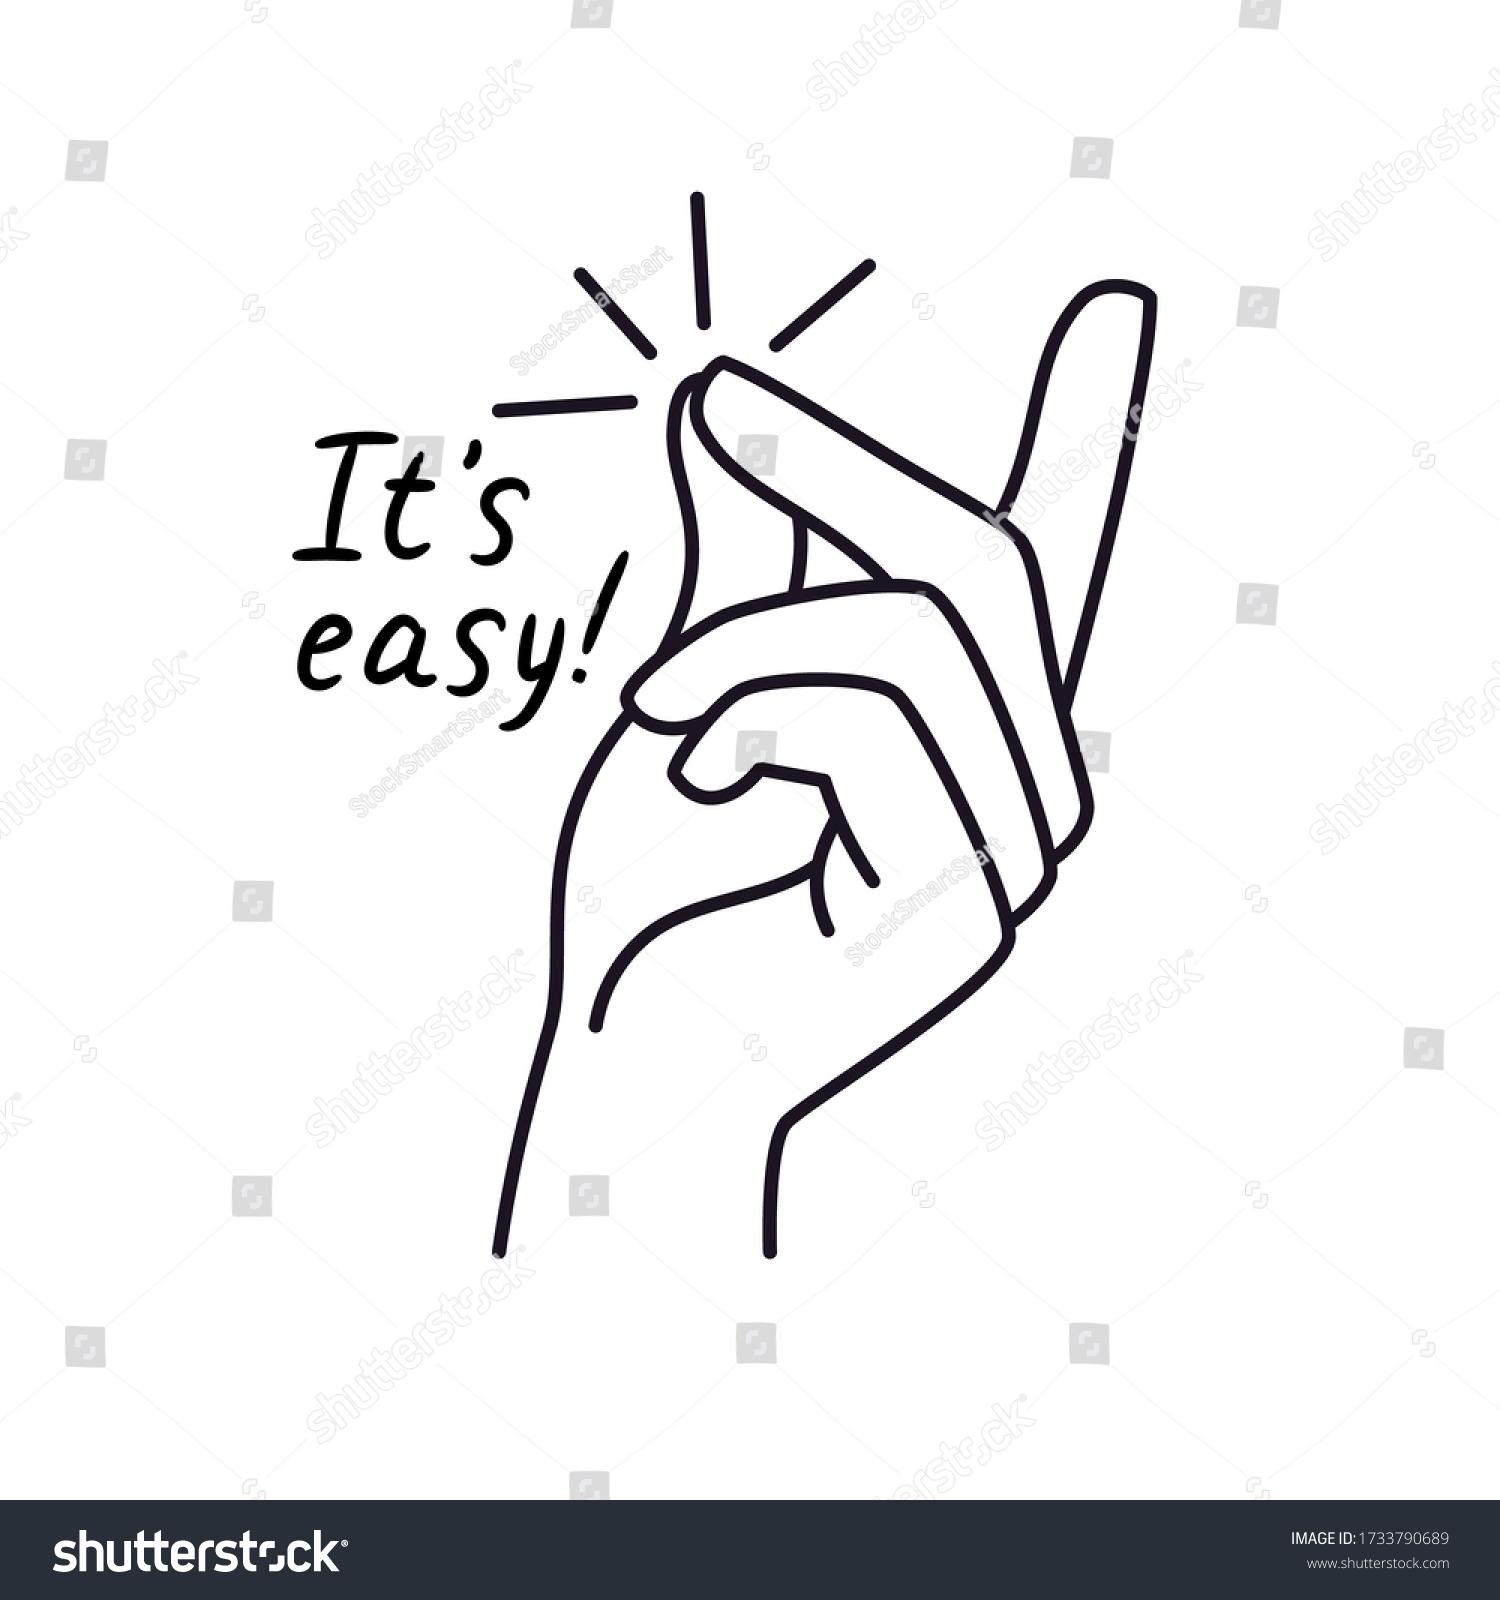 stock-vector-easy-gesture-snapping-finger-magic-gesture-sketch-drawing-winning-expression-or-h...jpg